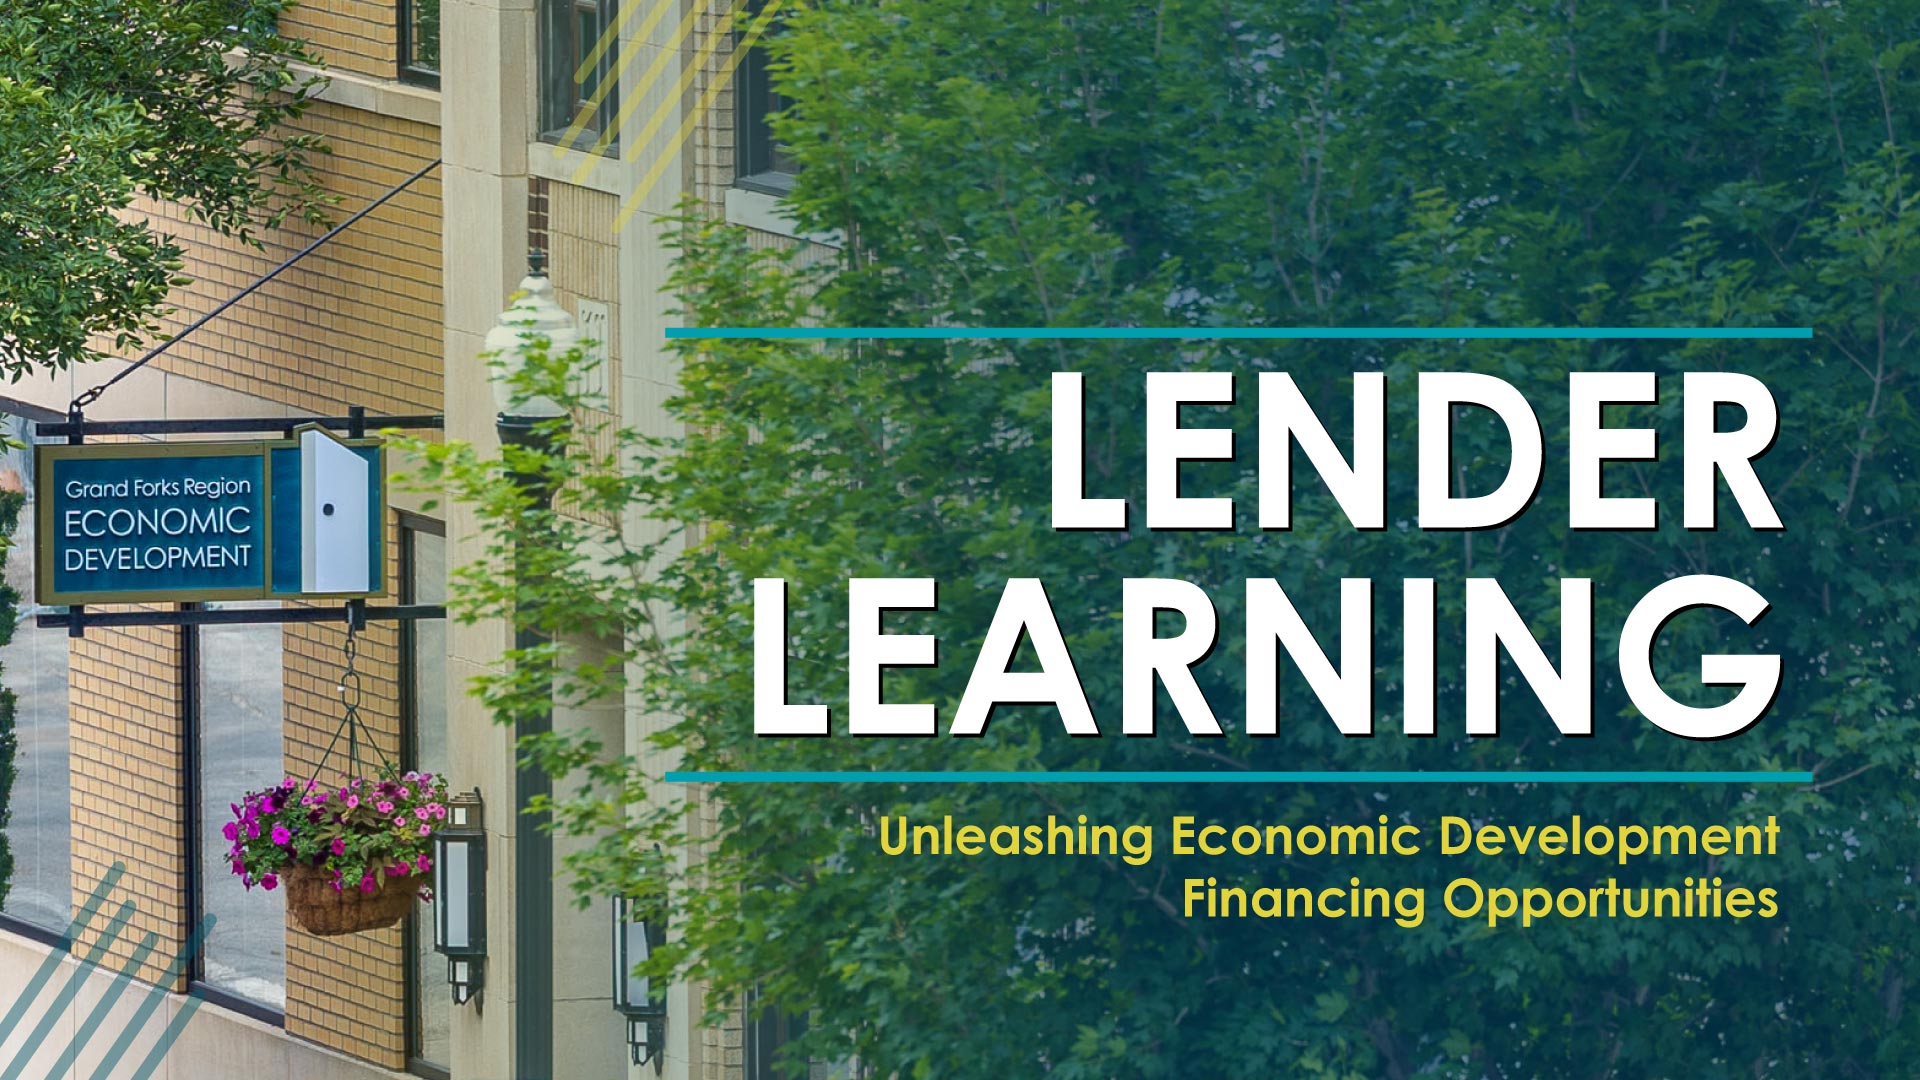 A mixed media graphic reveals an image of the entrance of the Grand Forks Region EDC and the words LENDER LEARNING. UNLEASHING ECONOMIC DEVELOPMENT FINANCING OPPORTUNITIES.